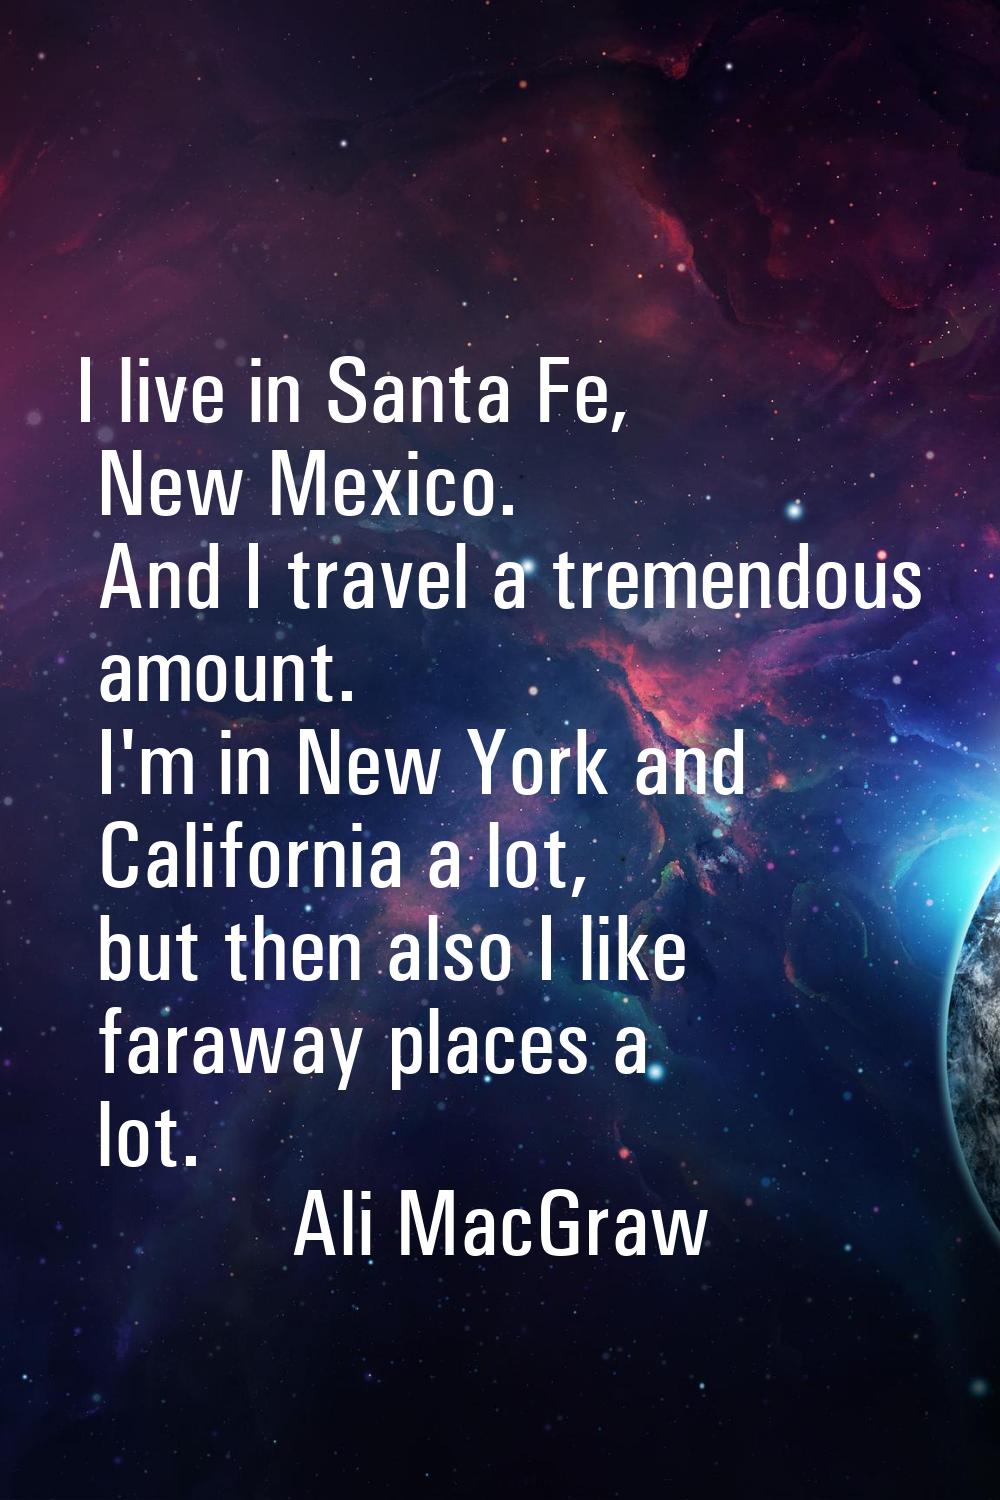 I live in Santa Fe, New Mexico. And I travel a tremendous amount. I'm in New York and California a 